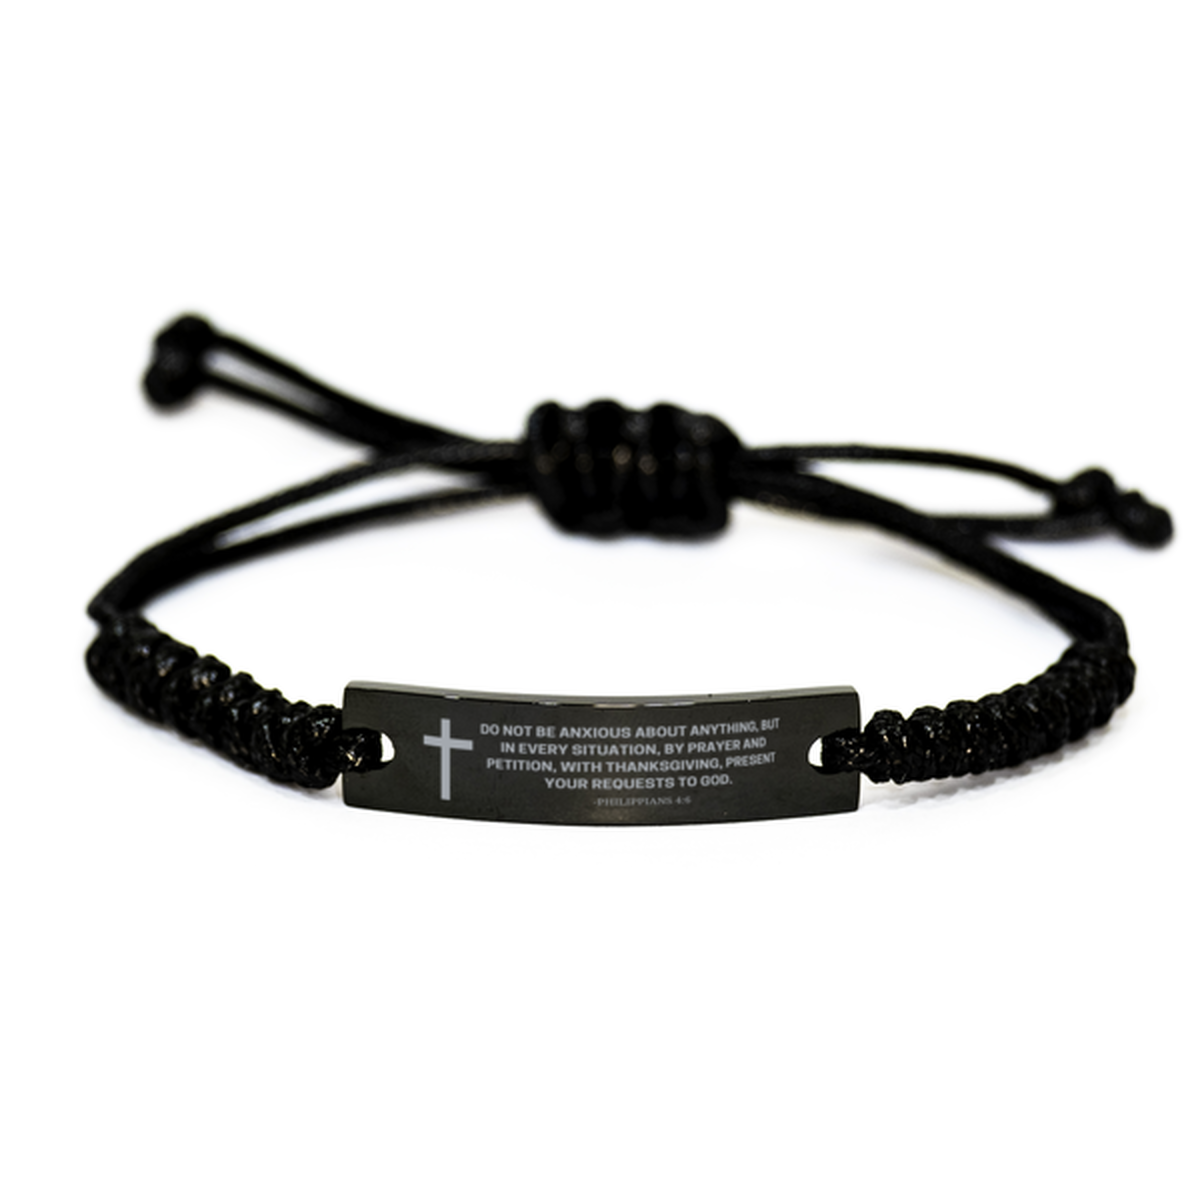 Baptism Gifts For Teenage Boys Girls, Christian Bible Verse Black Rope Bracelet, Do not be anxious about anything, Catholic Confirmation Gifts for Son, Godson, Grandson, Nephew